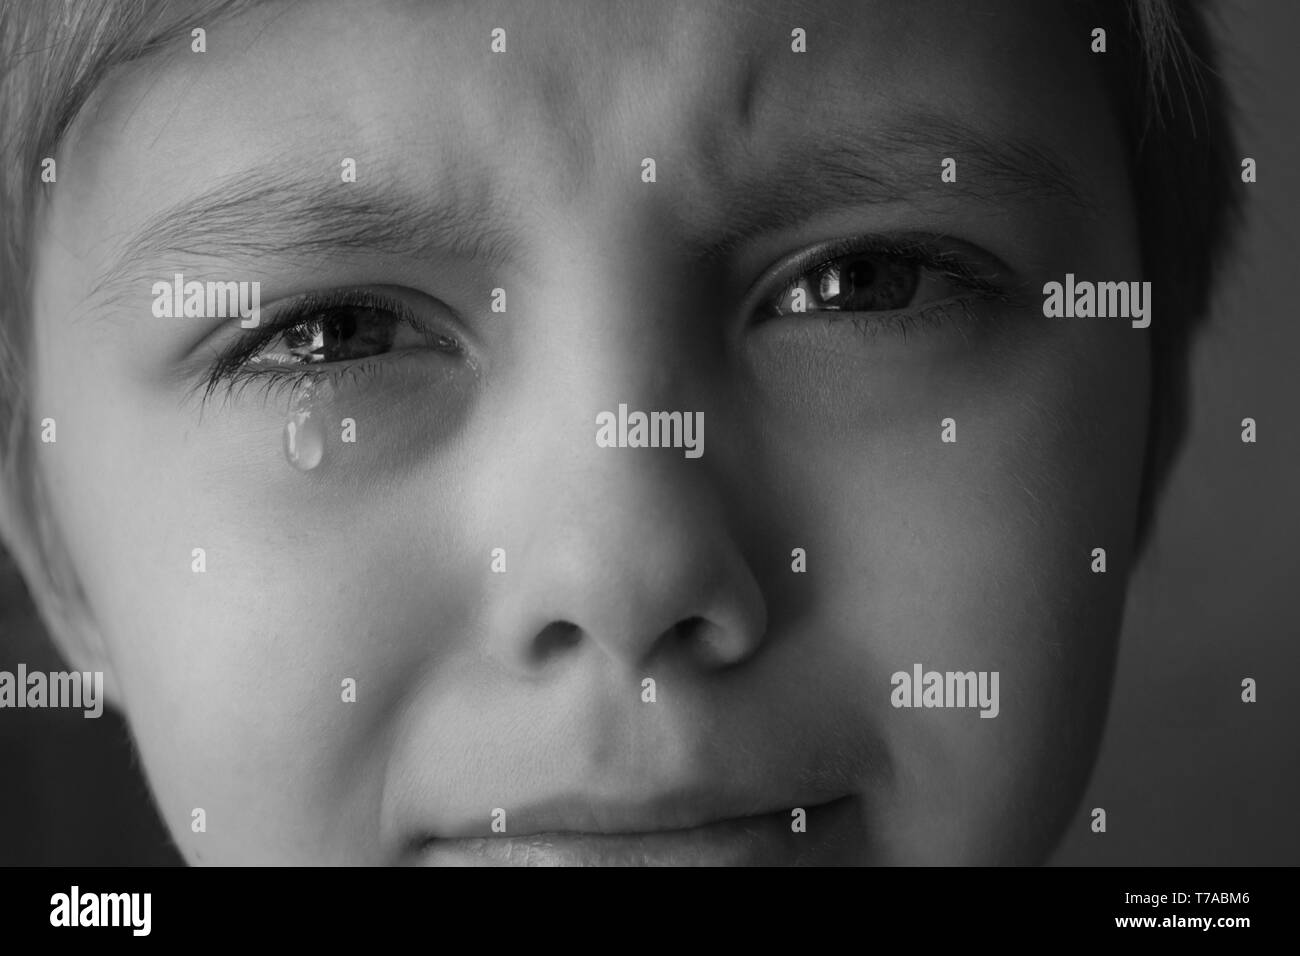 Tears in the eyes of a child. A tear on the boy's cheek. Close-up ...